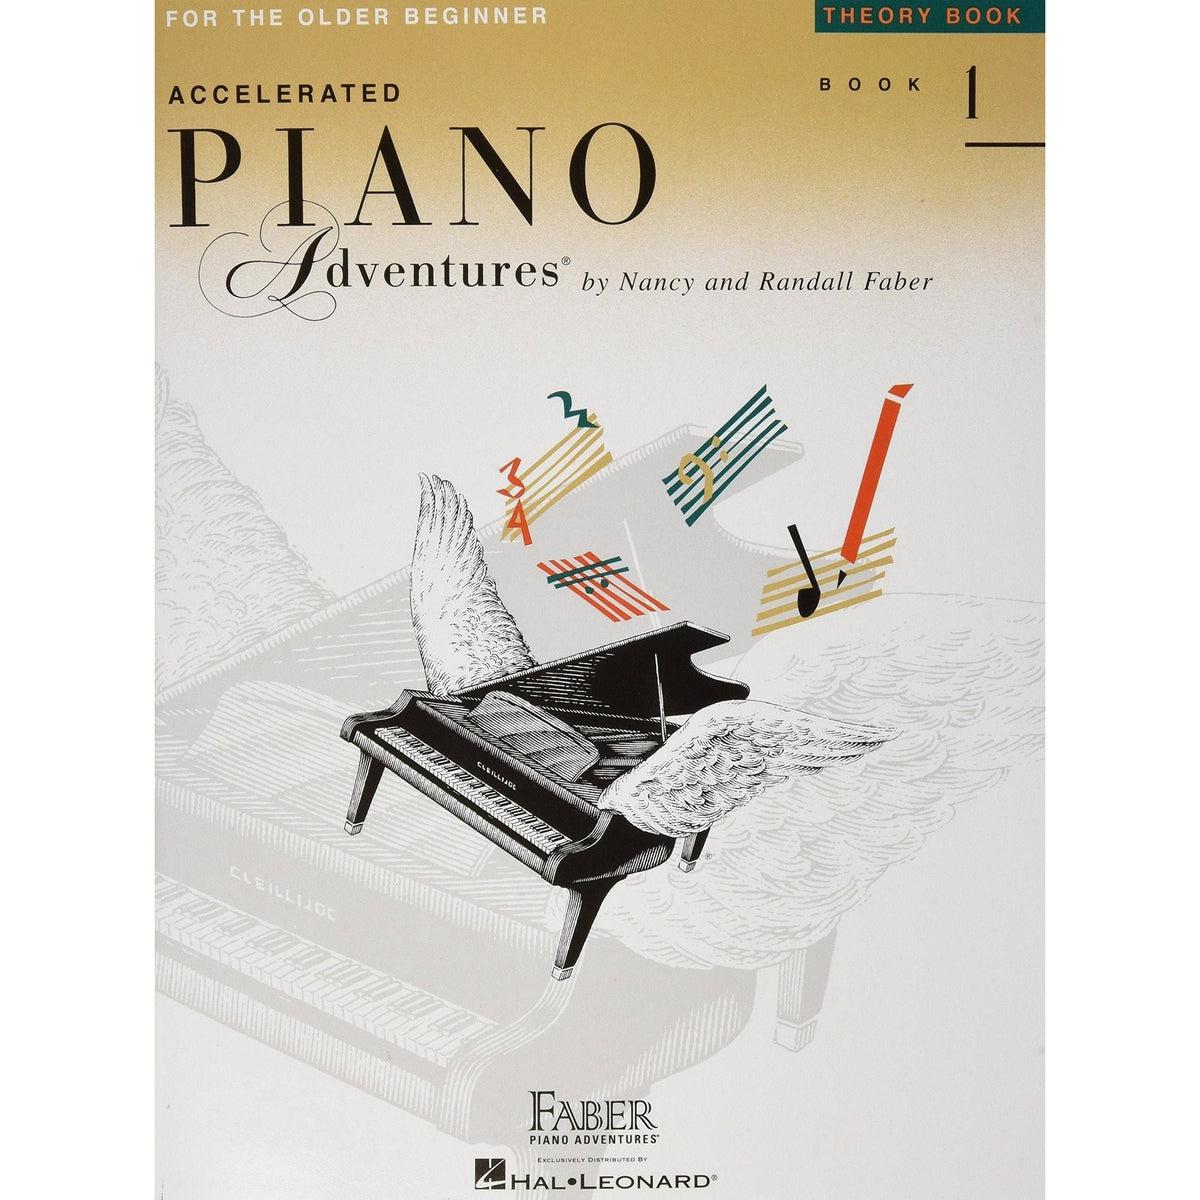 Accelerated Piano Adventures For The Older Beginner | Theory Book 1